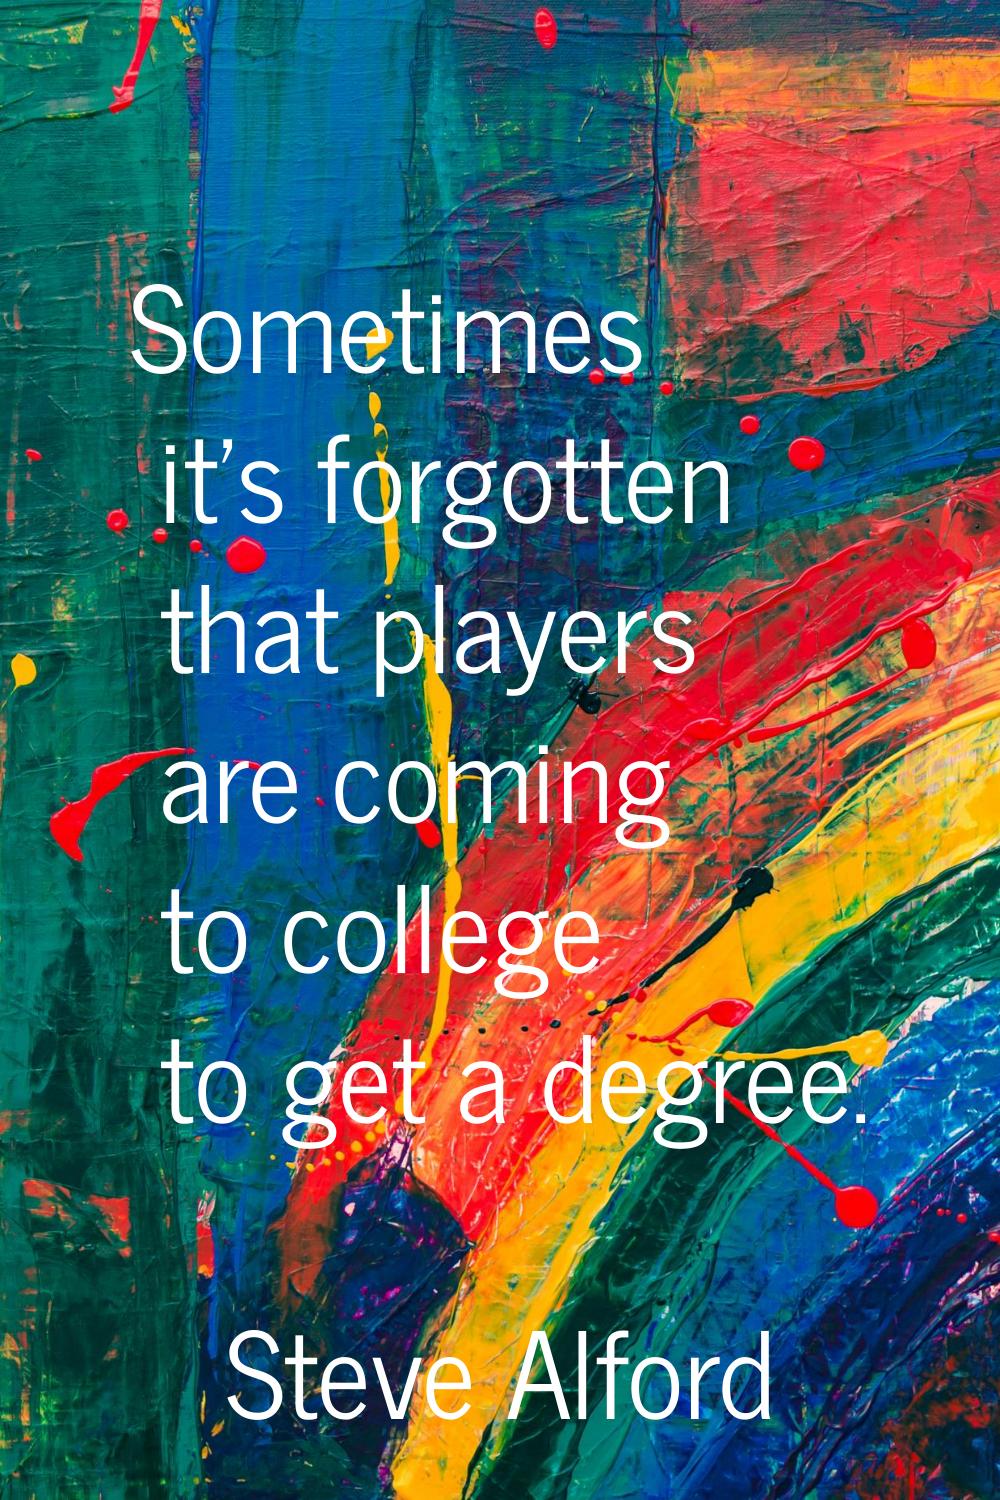 Sometimes it's forgotten that players are coming to college to get a degree.